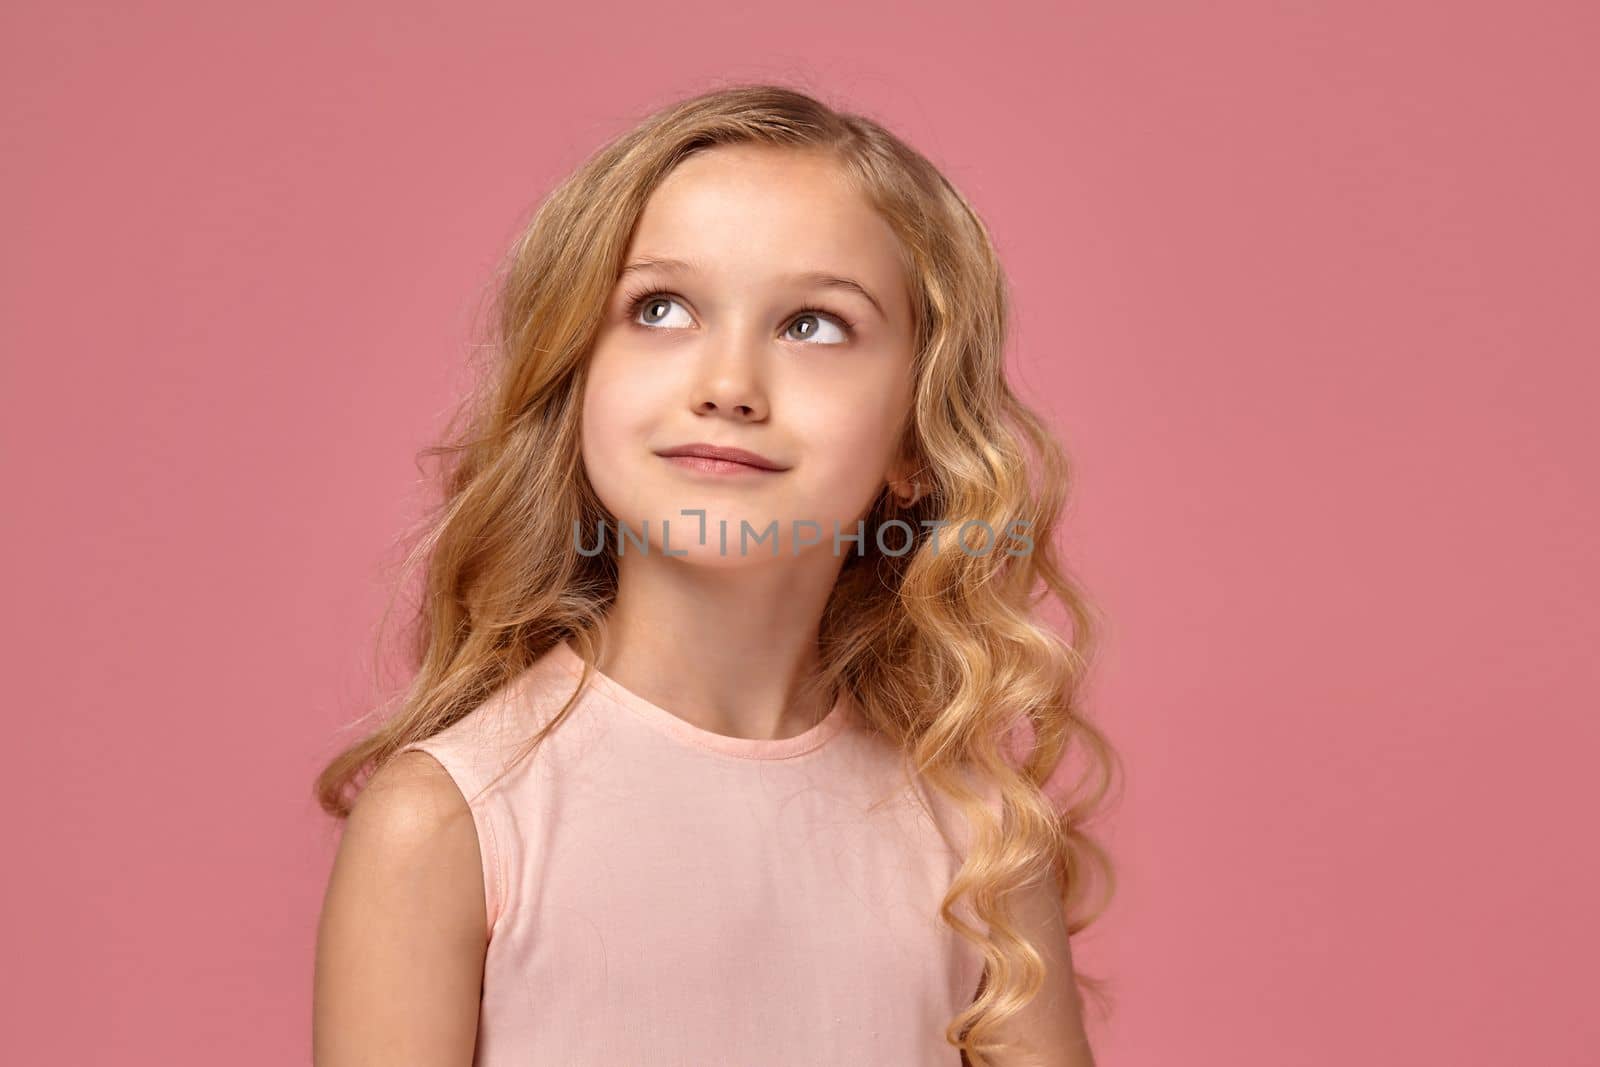 Little girl with a blond curly hair, in a pink dress is looking away, on a pink background